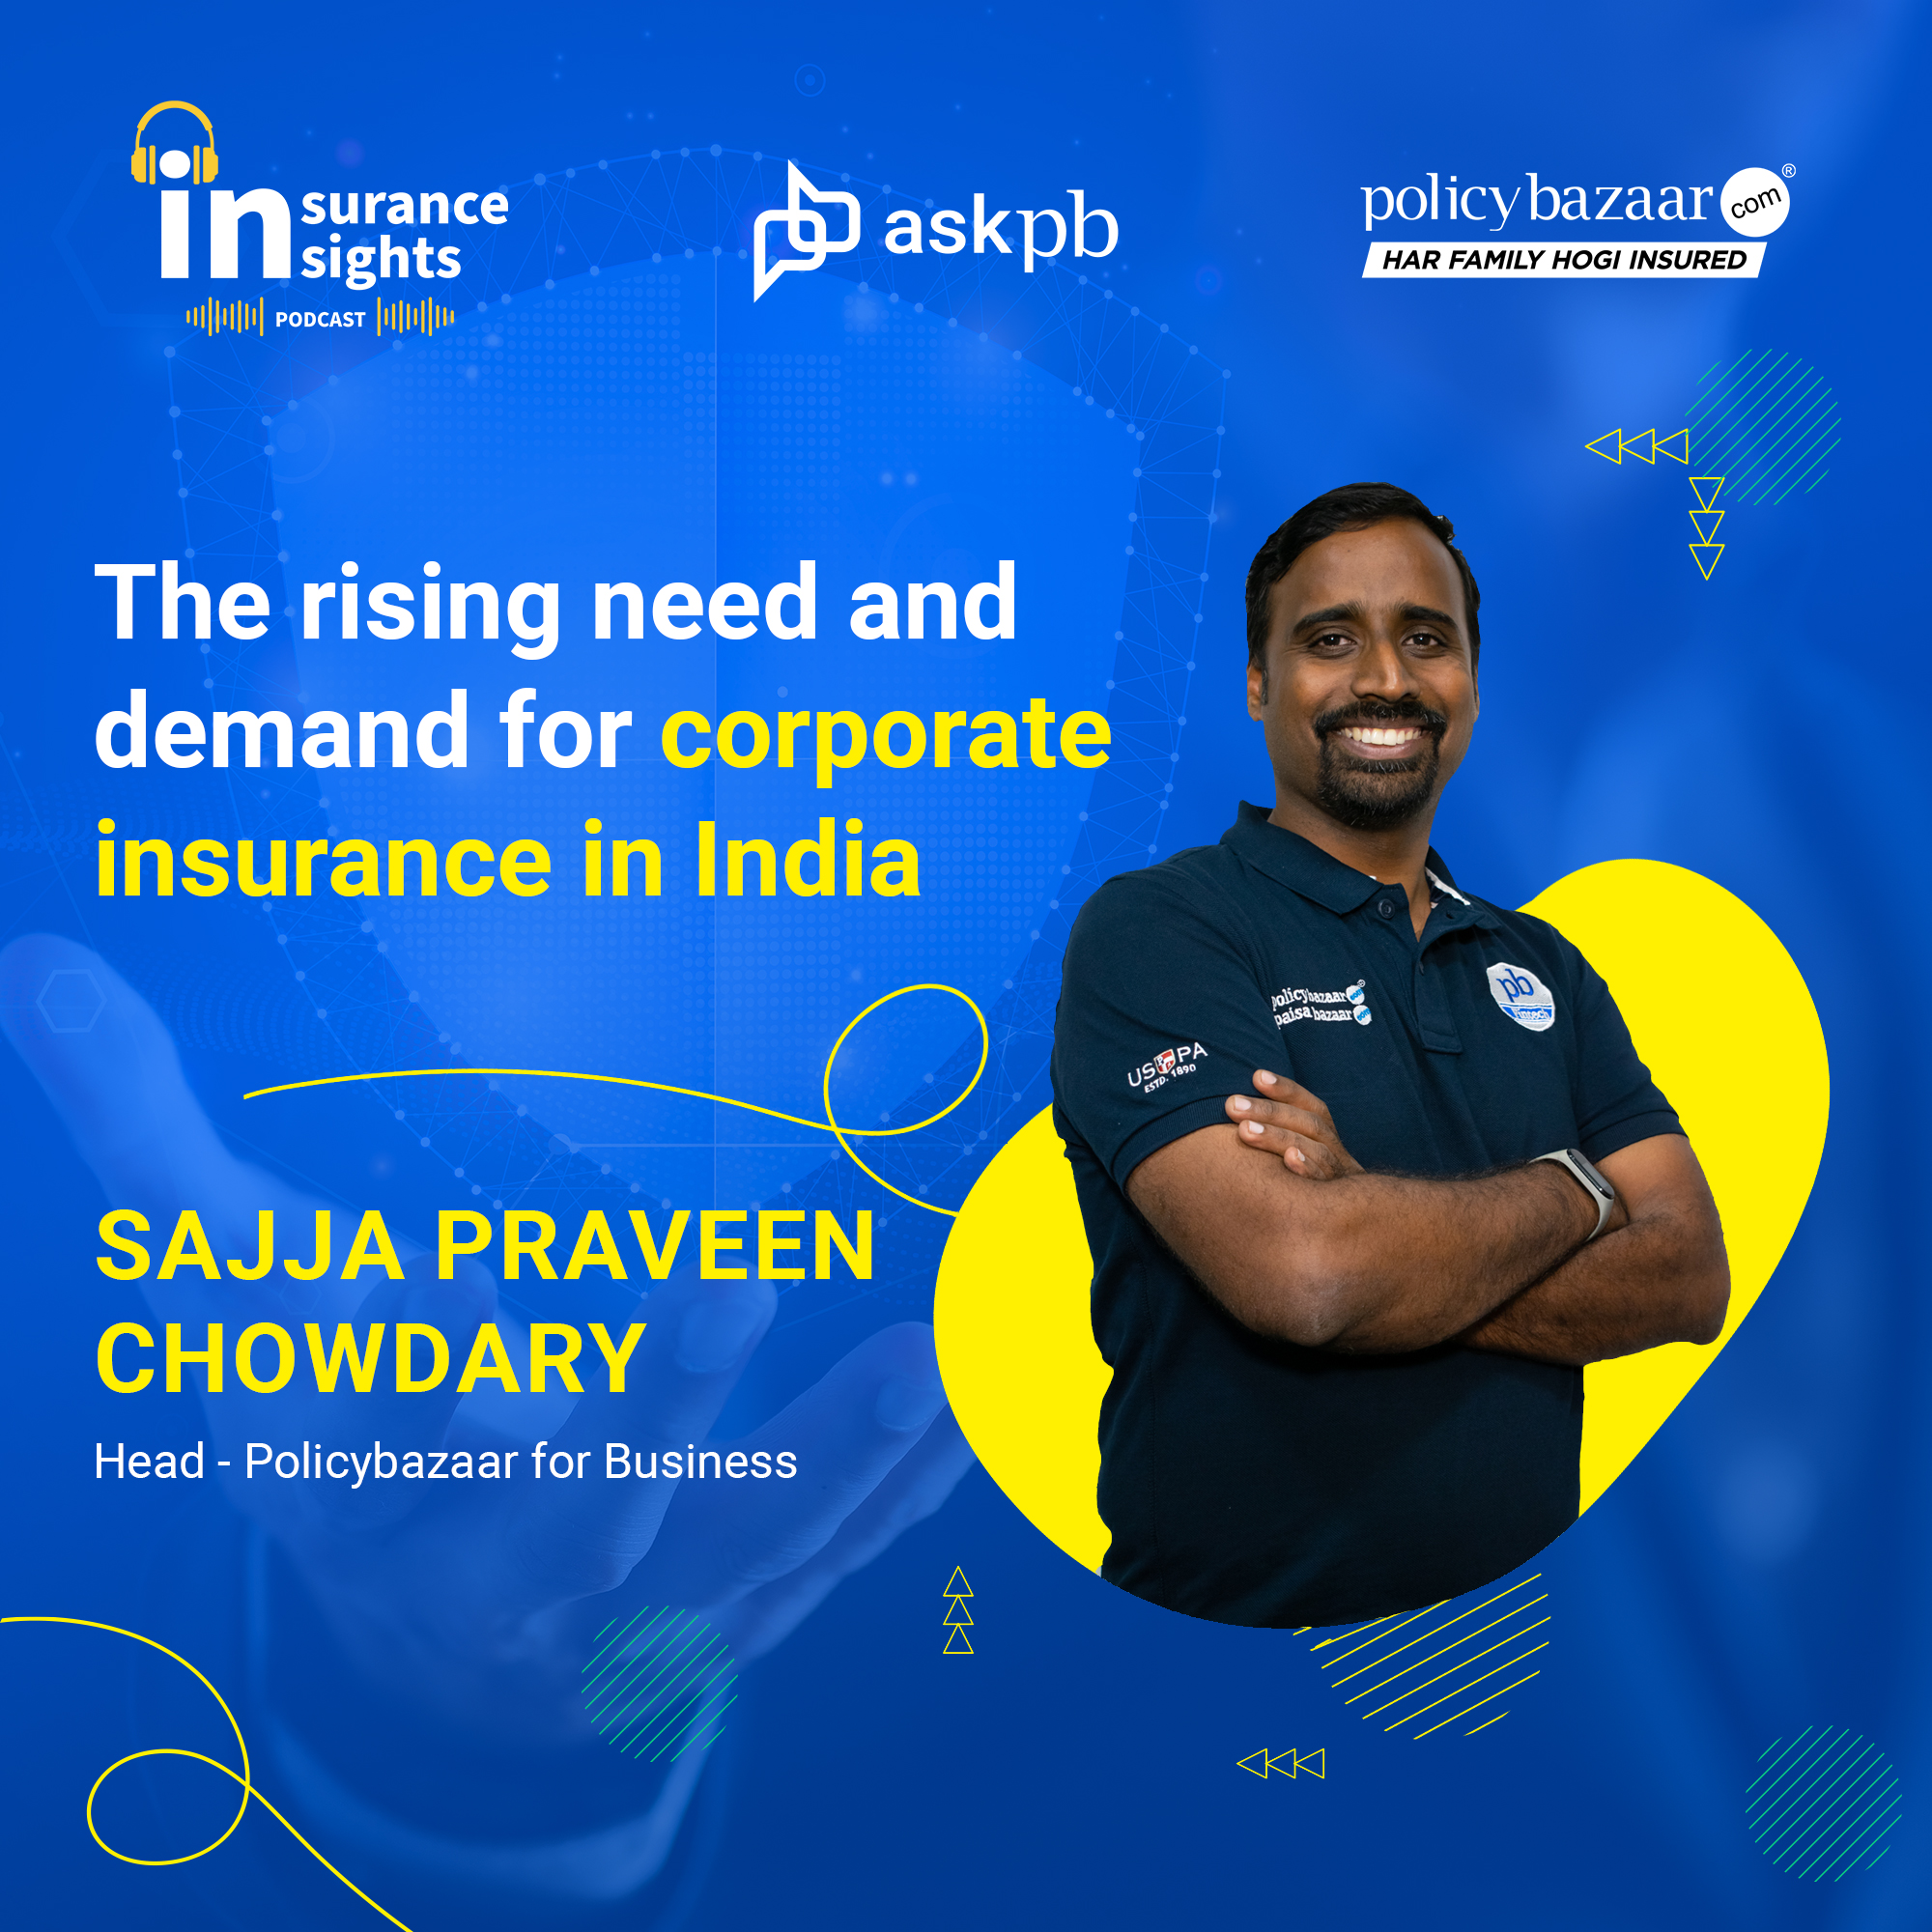 The rising need and demand for corporate insurance in India